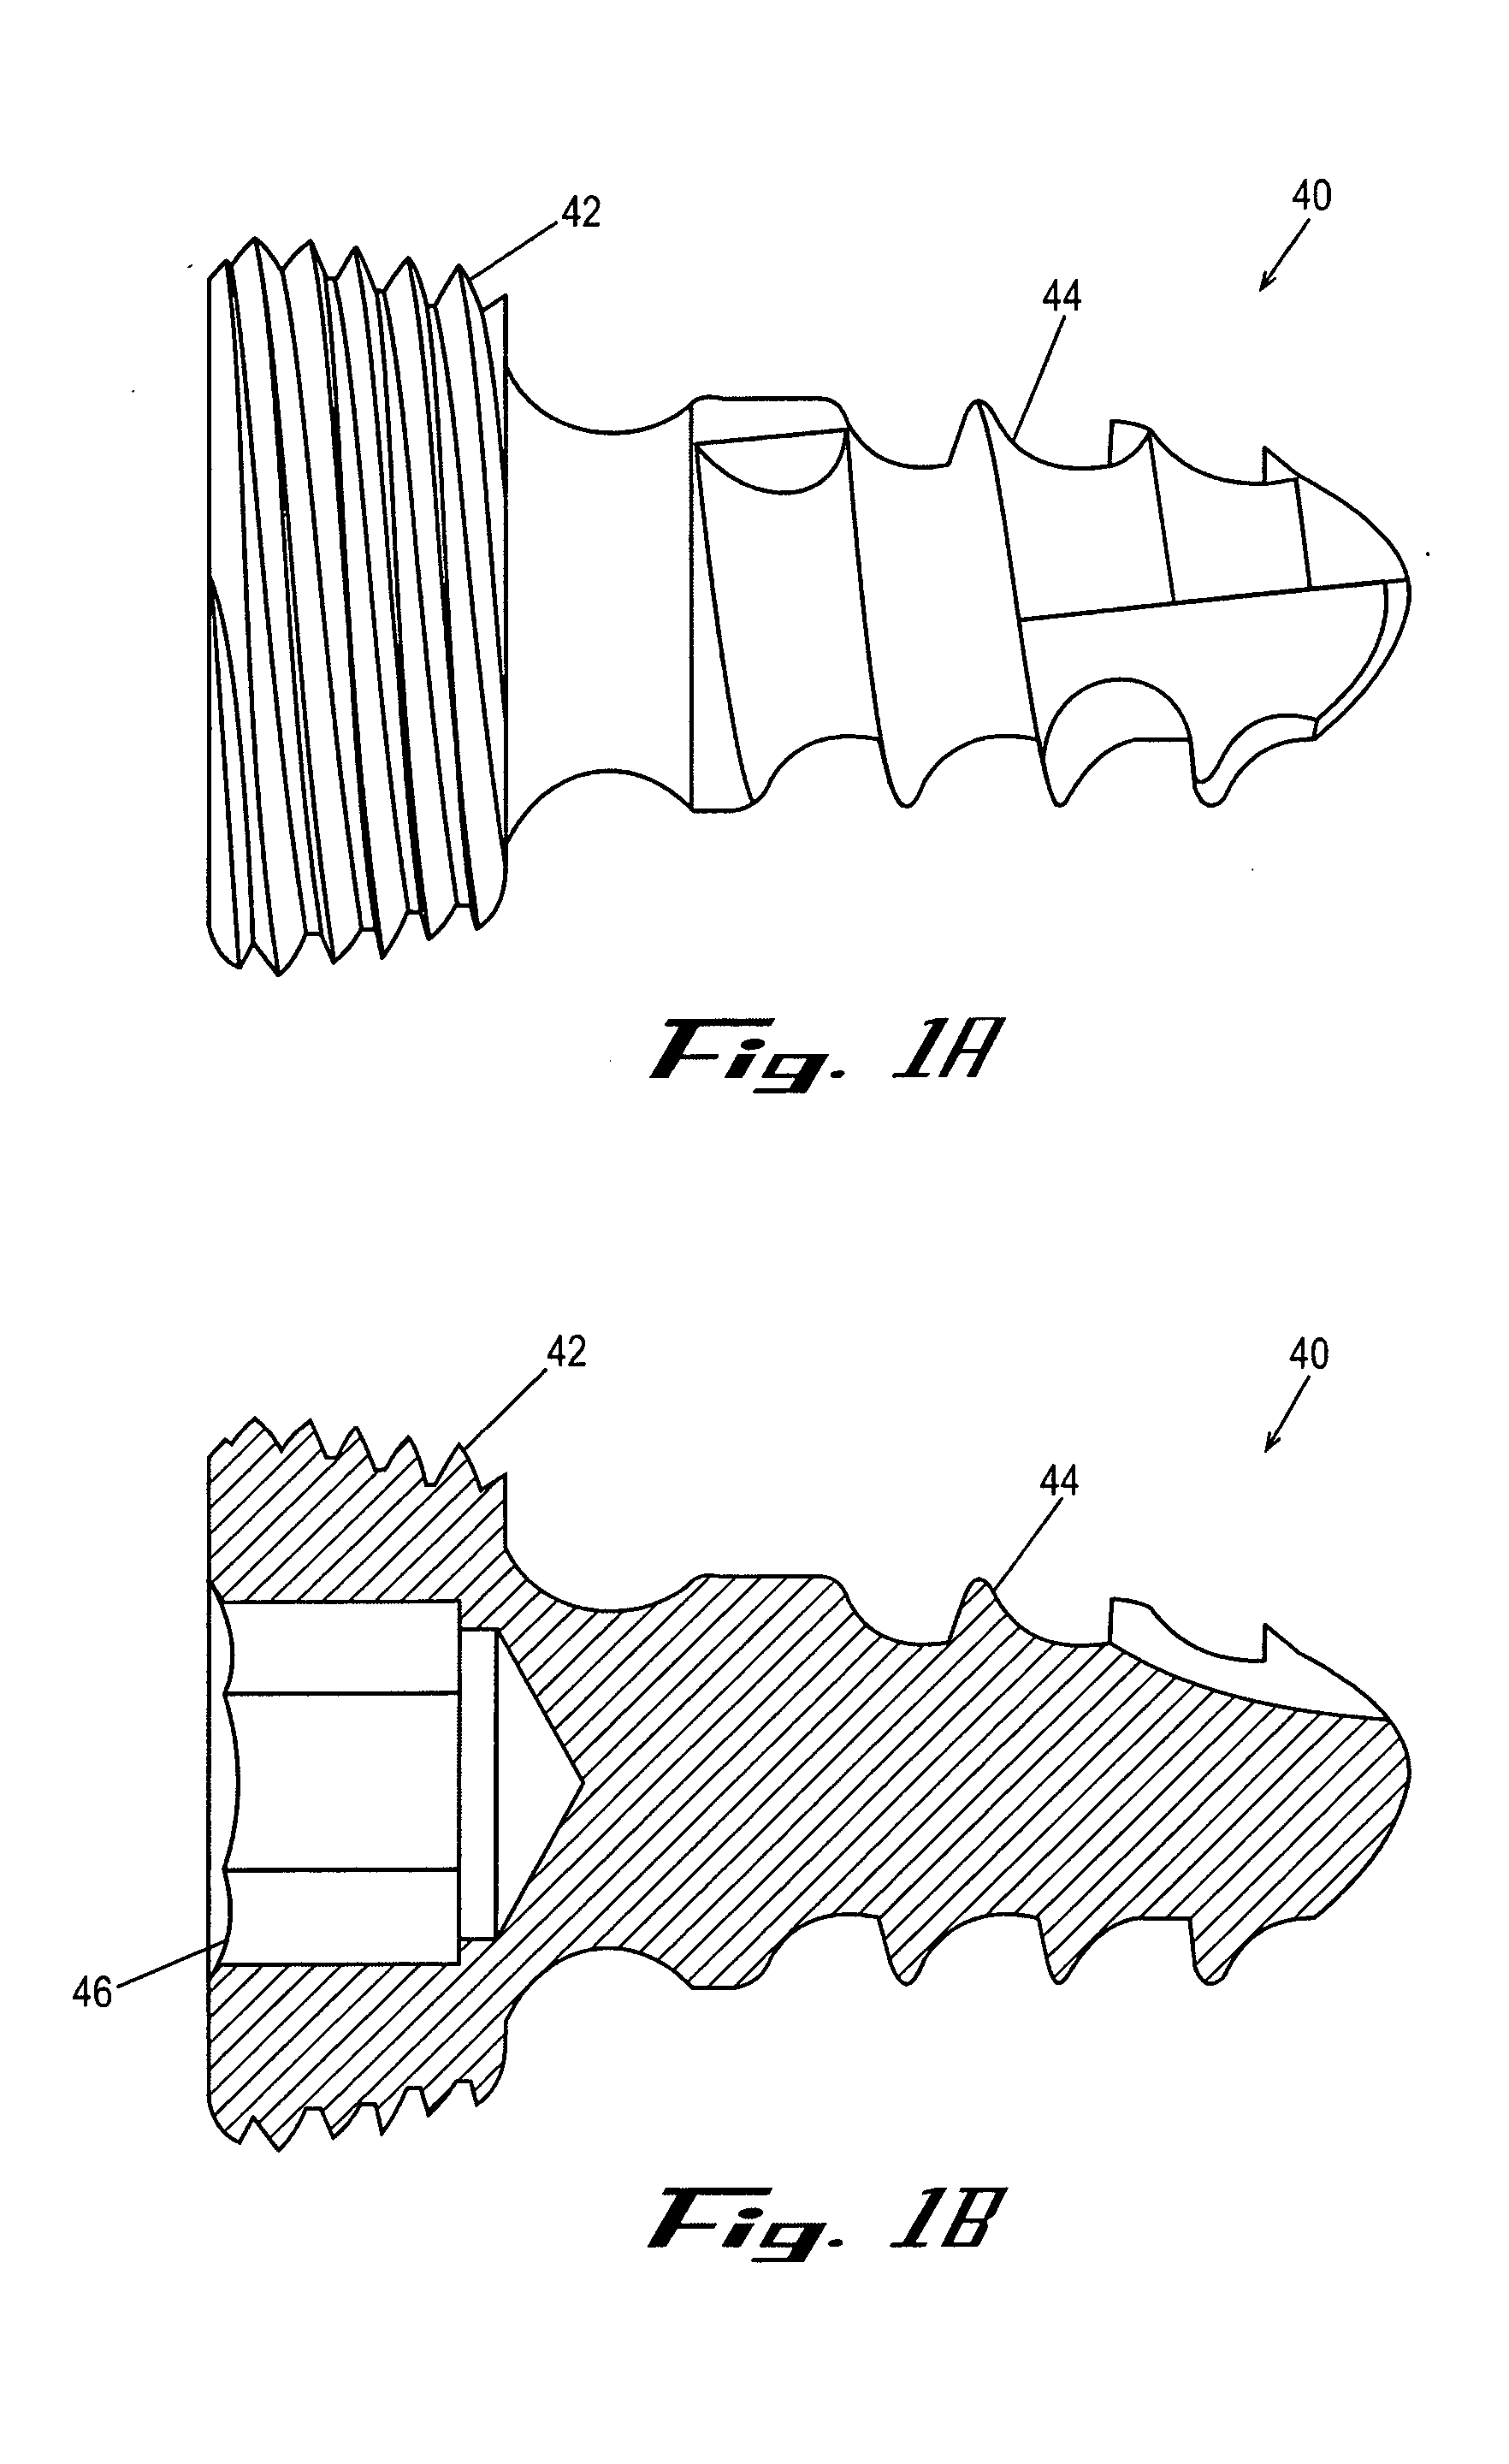 Bone plates and methods for provisional fixation using same